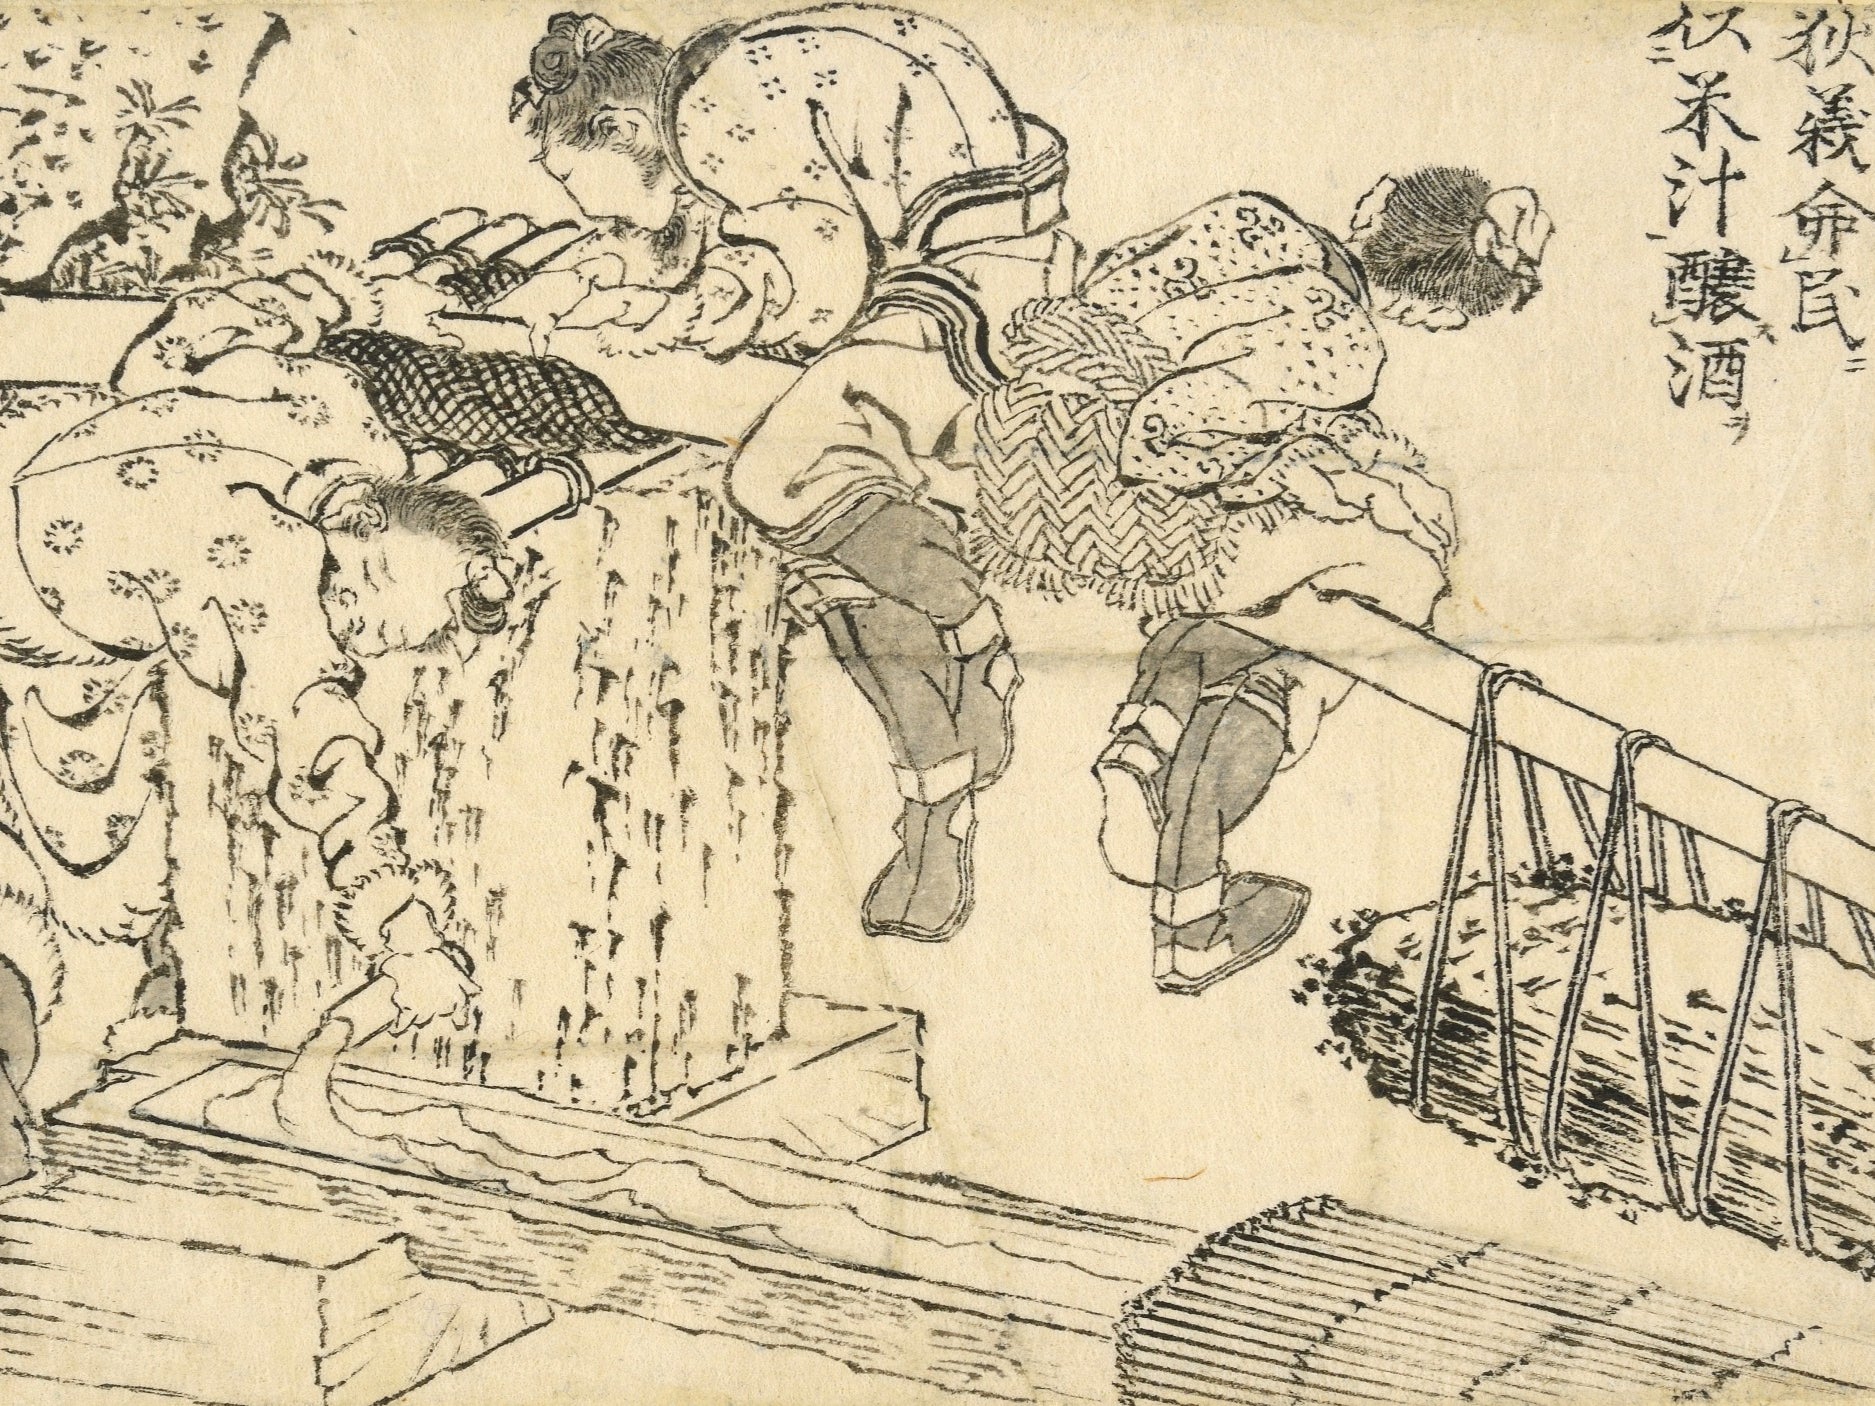 ‘Yi Di (Giteki) orders the people to use rice juice to brew wine’: Yi Di is said to be one of the earliest brewers of rice wine, which he presented to Yu the Great of the Xia dynasty. In this comic scene, men seem to be using the weight of a large rock to squeeze liquor from the rice